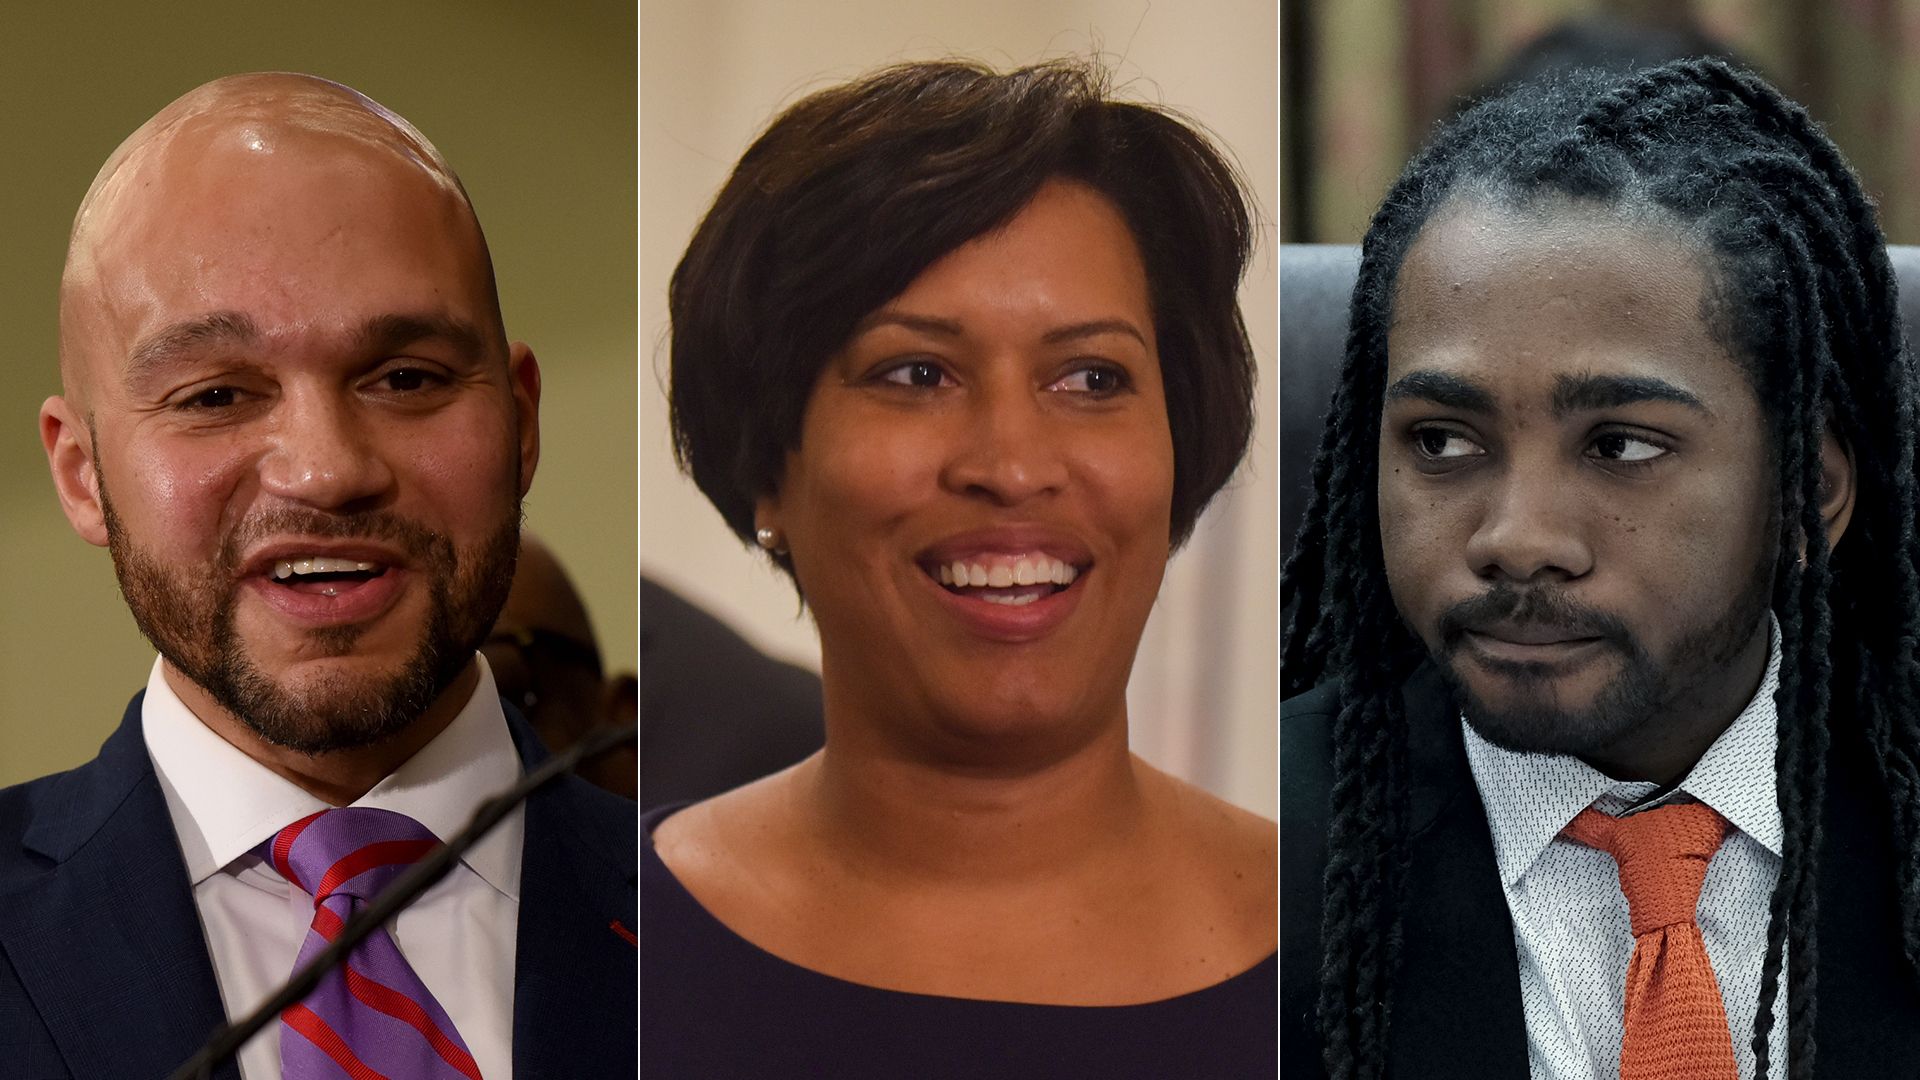 Side-by-side photos of Robert White, Muriel Bowser, and Trayon White